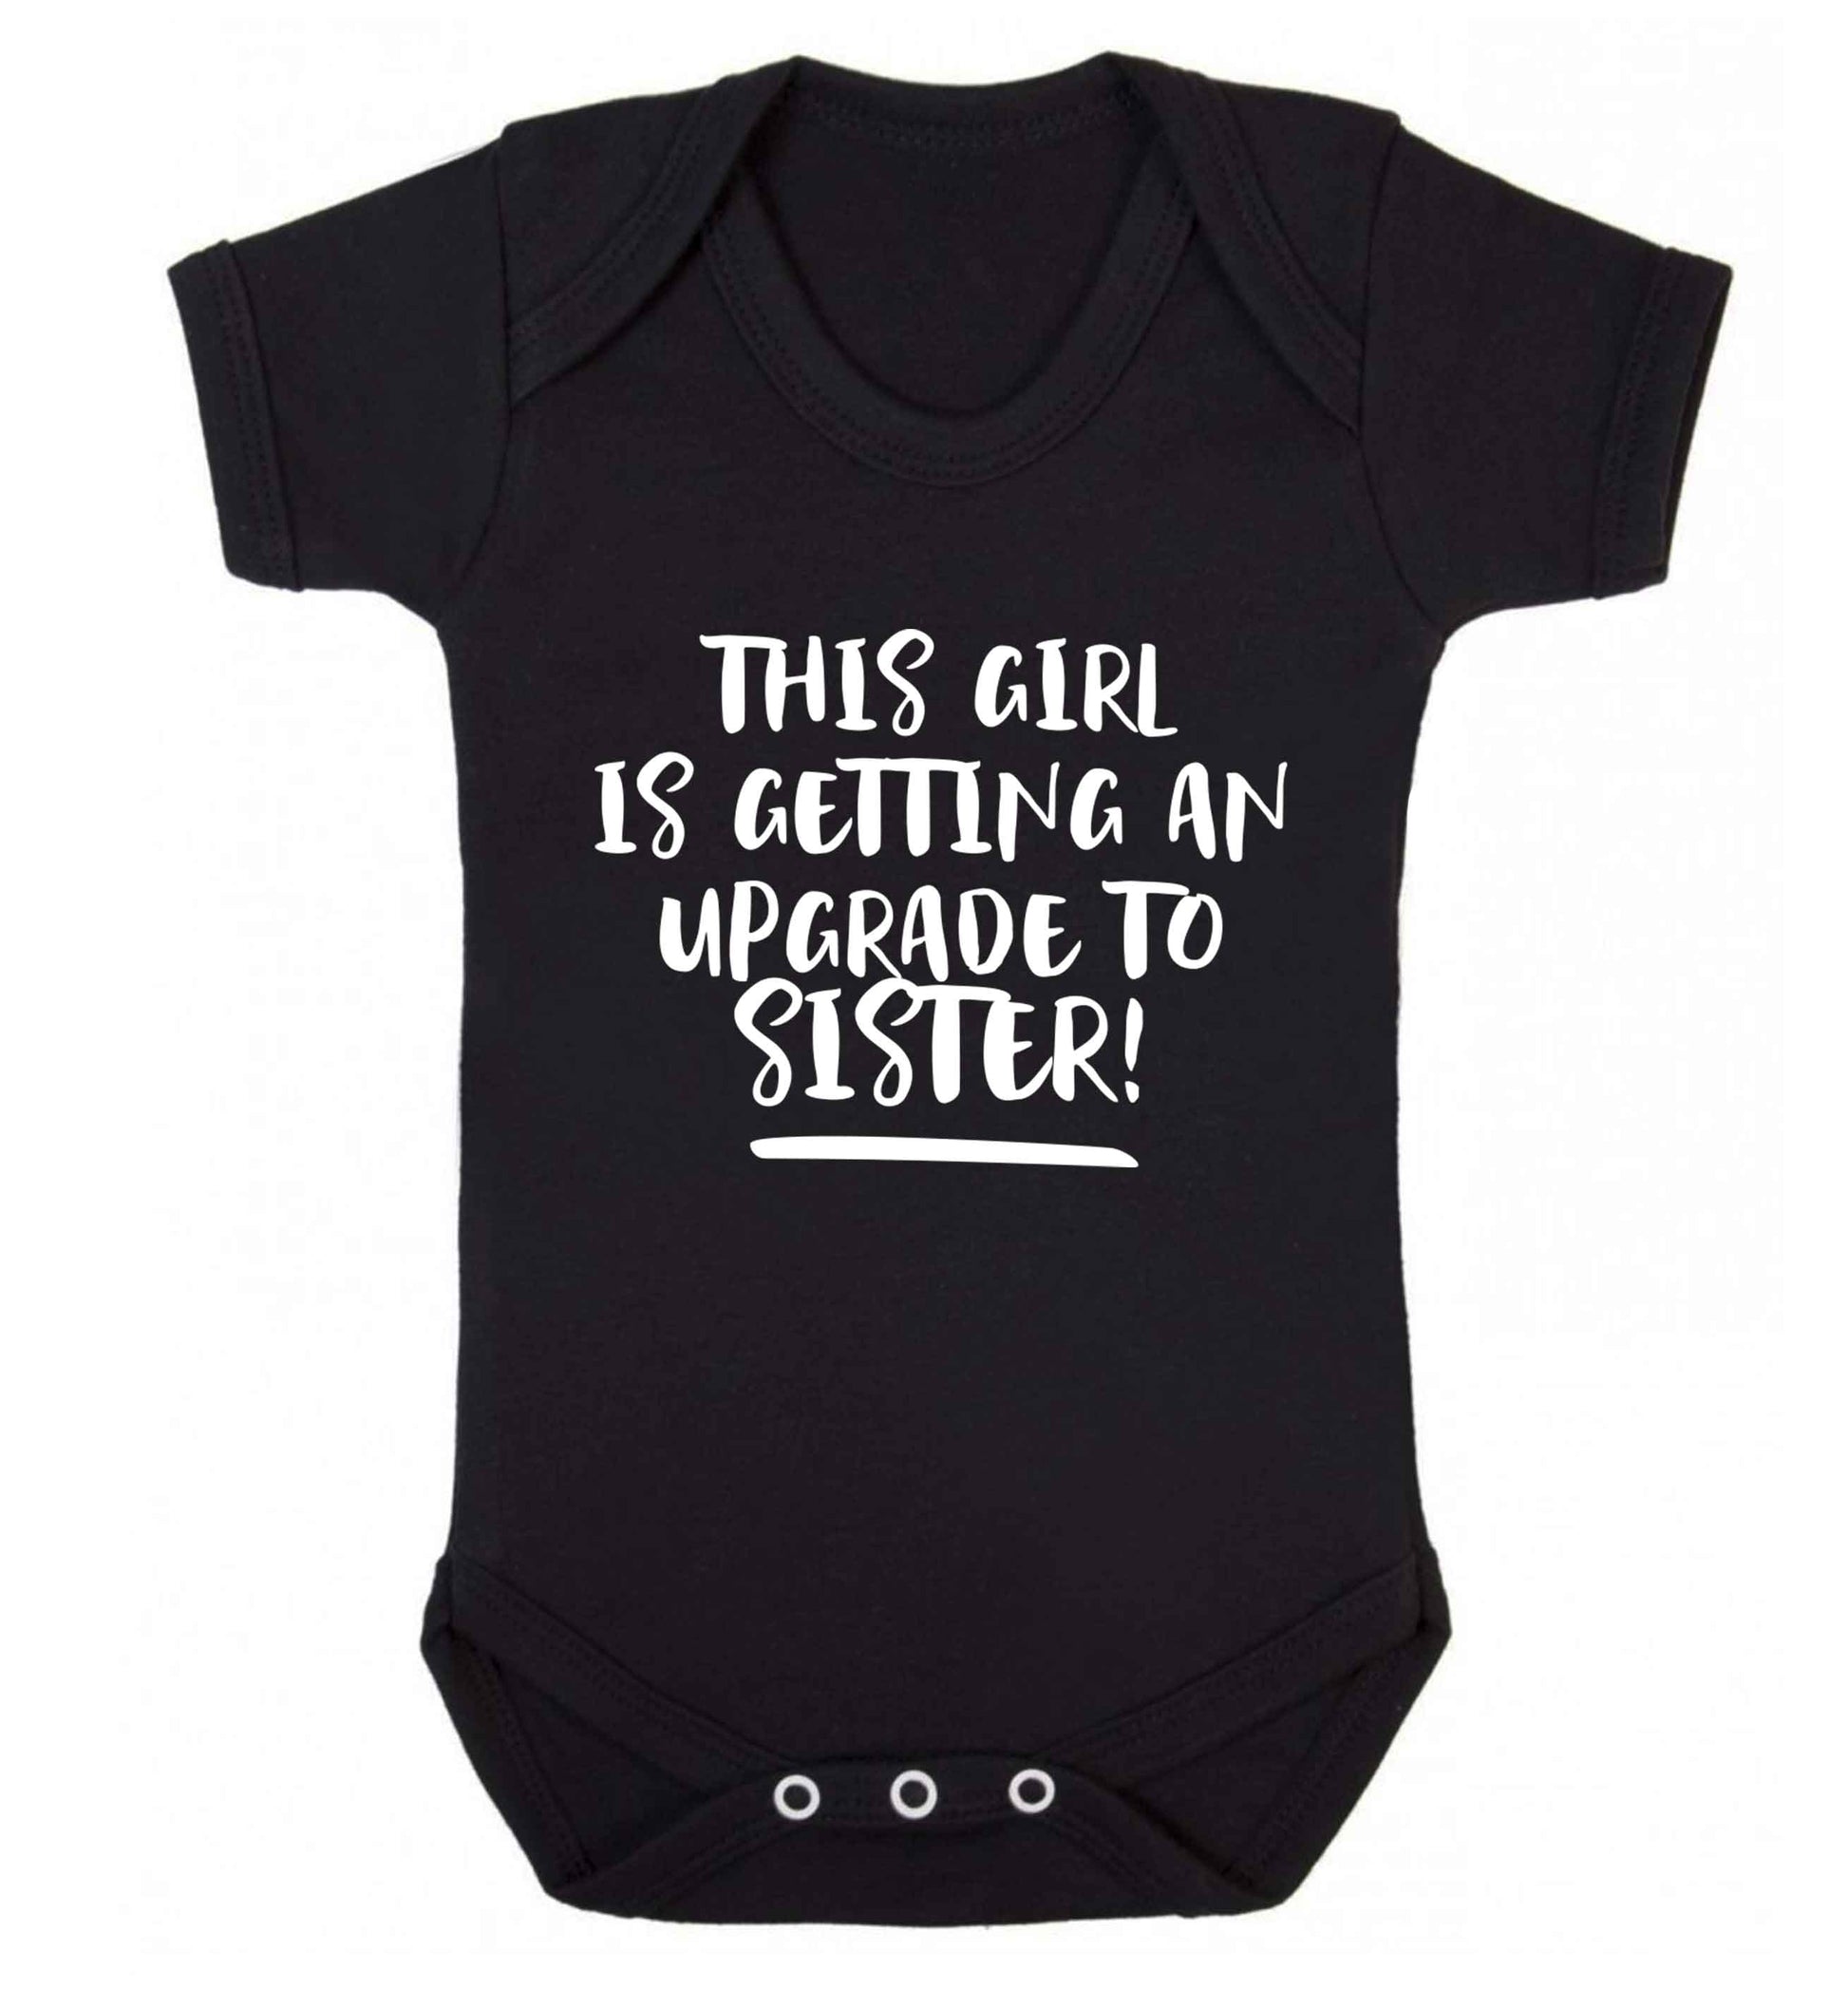 This girl is getting an upgrade to sister! Baby Vest black 18-24 months